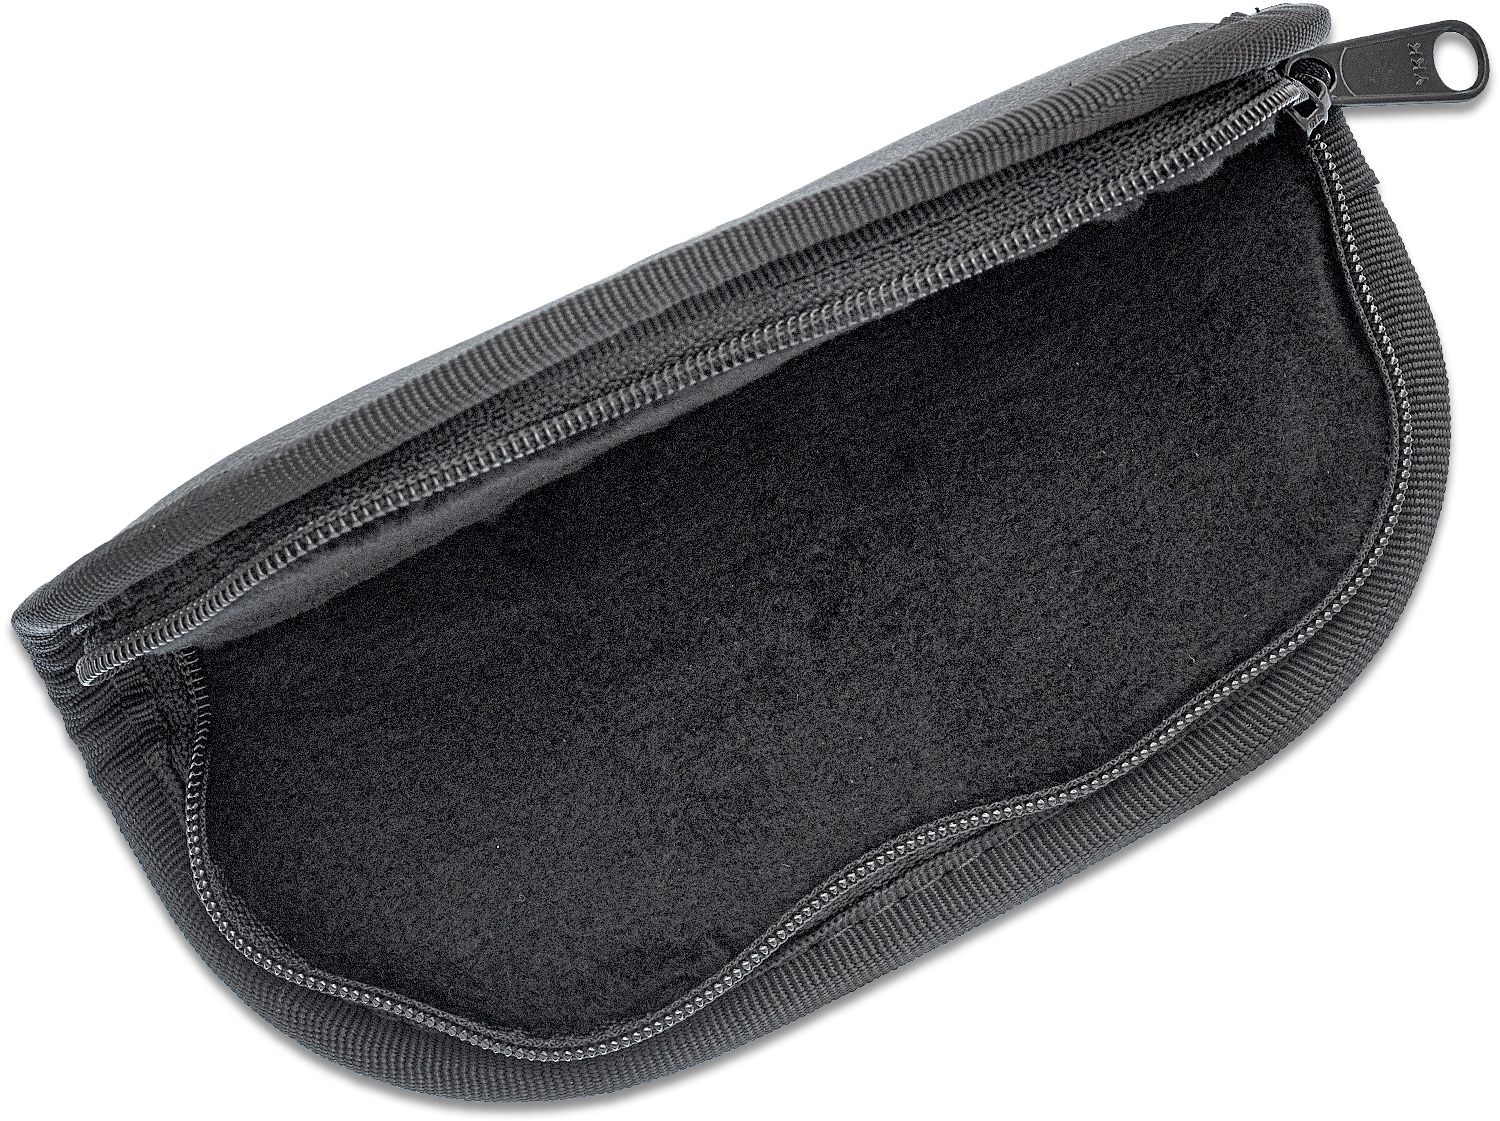 Download Spyderco Large Mock Leather Padded Zipper Pouch, 7 ...